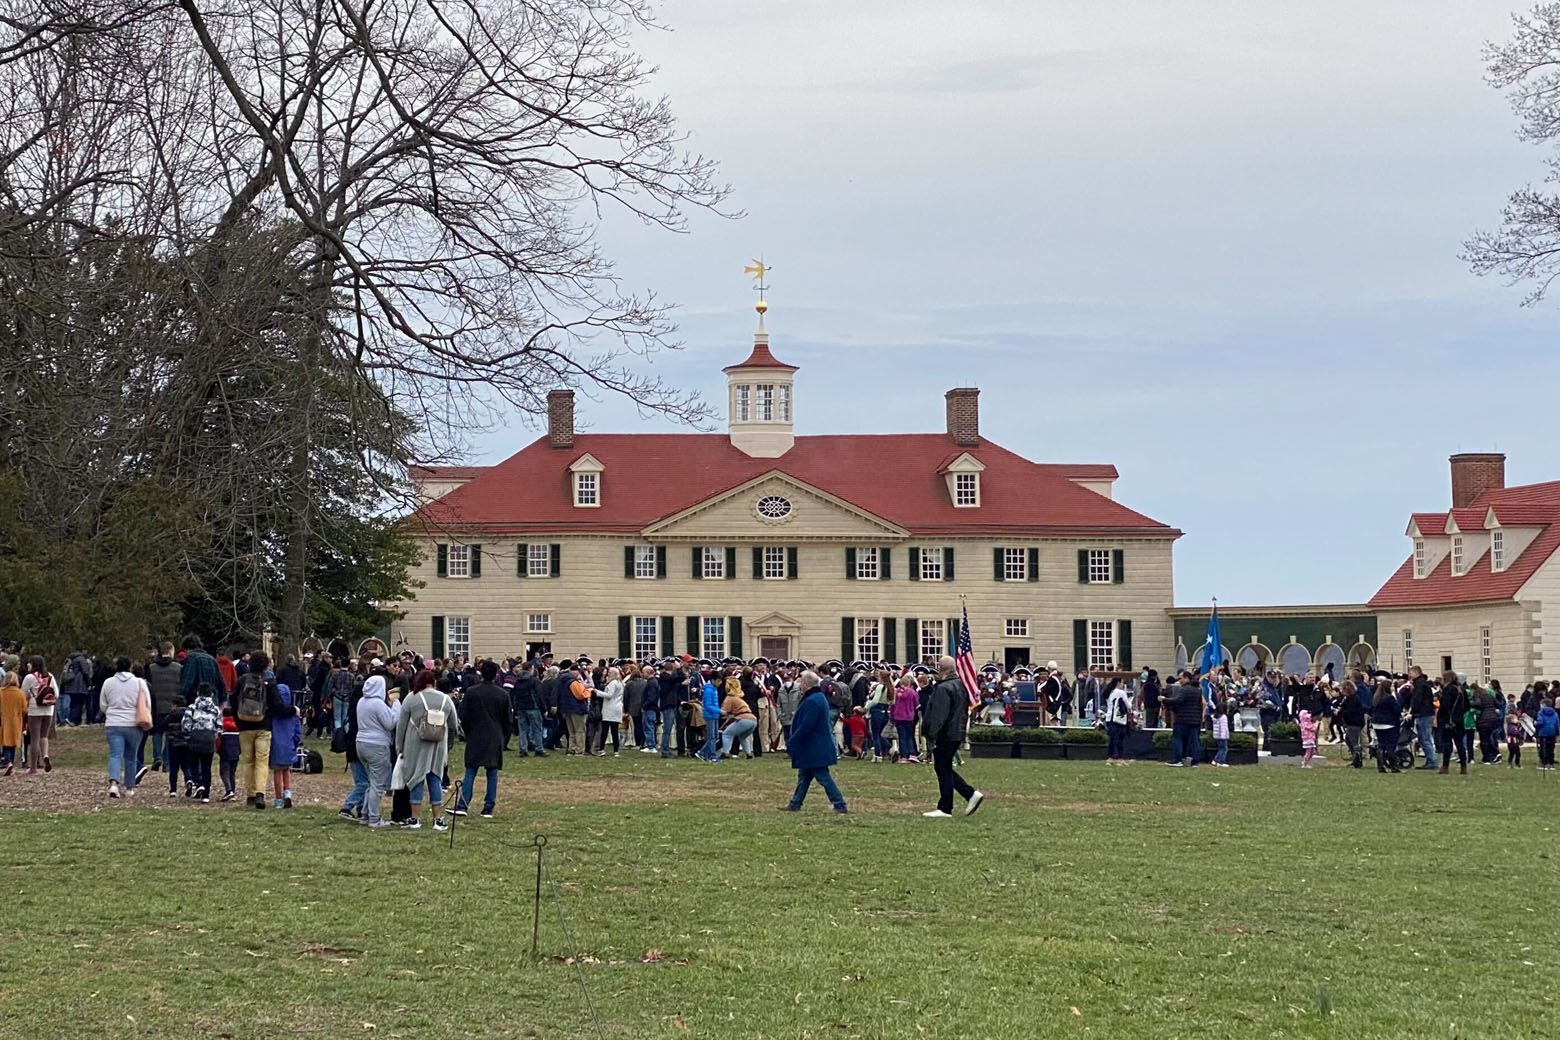  An image of the George Washington estate with a crowd of people walking towards the mansion where an extremely rare cherry cordial bottle was unearthed.